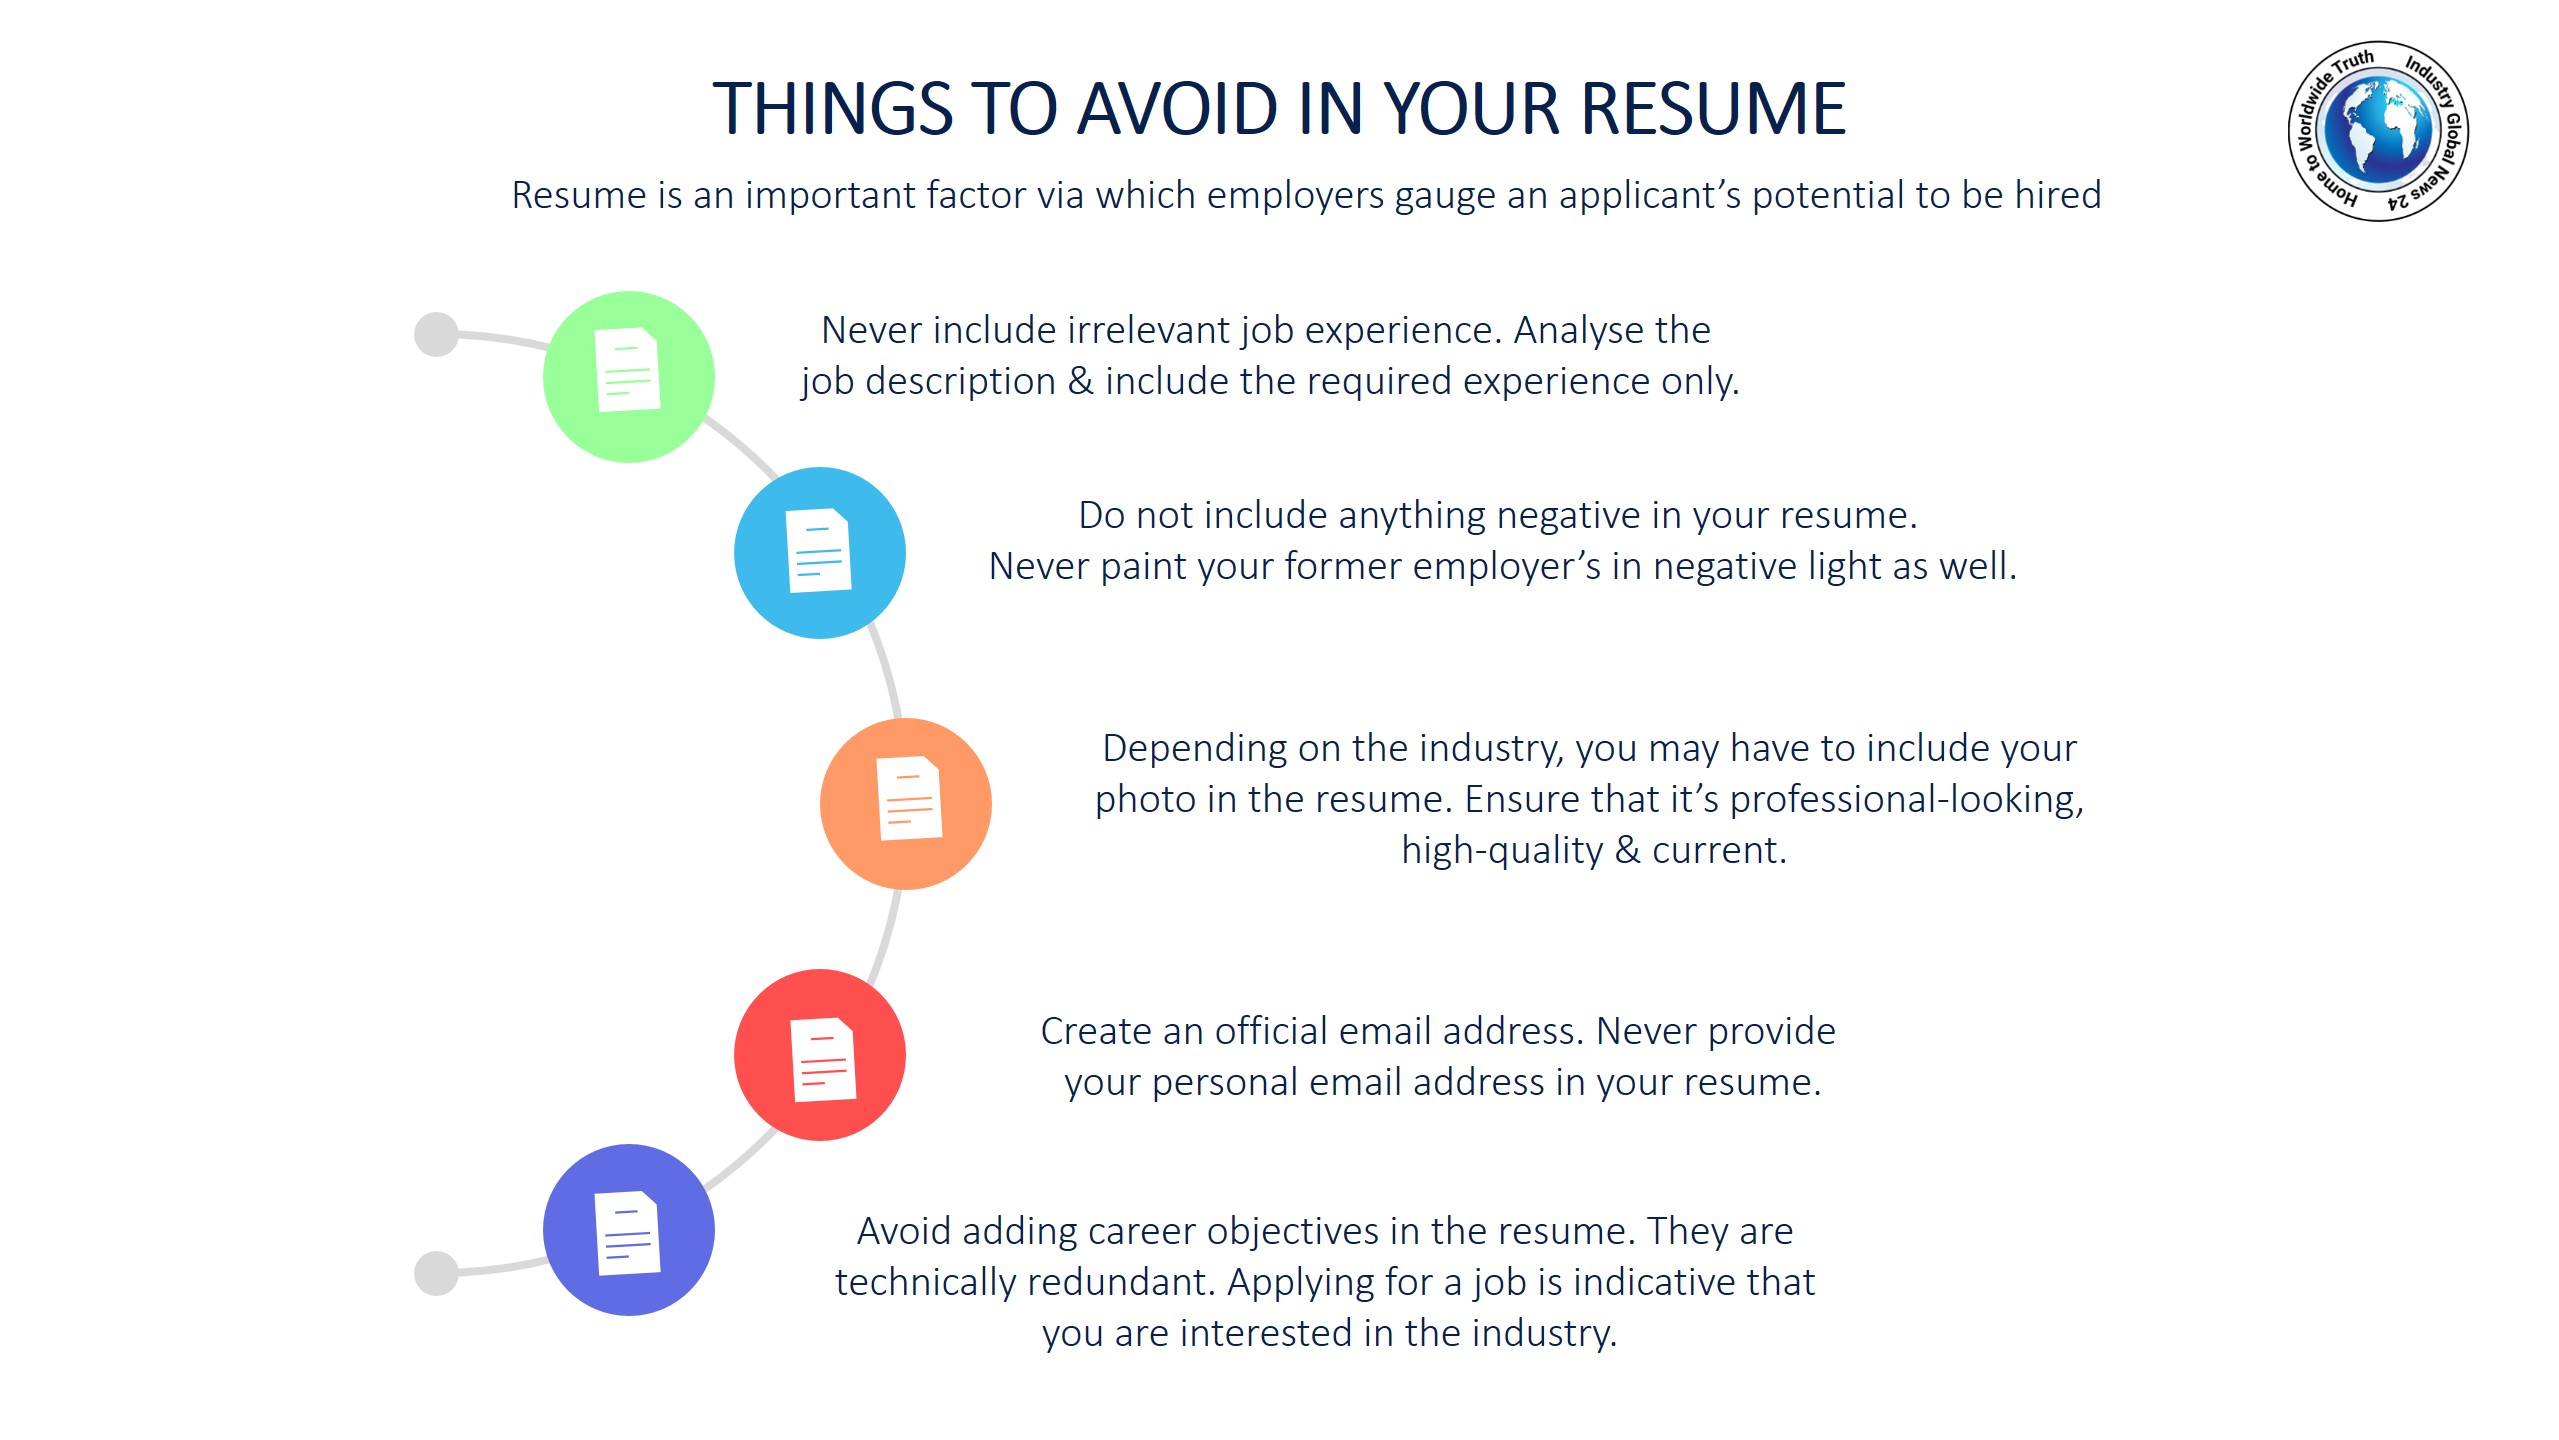 Things to avoid in your resume